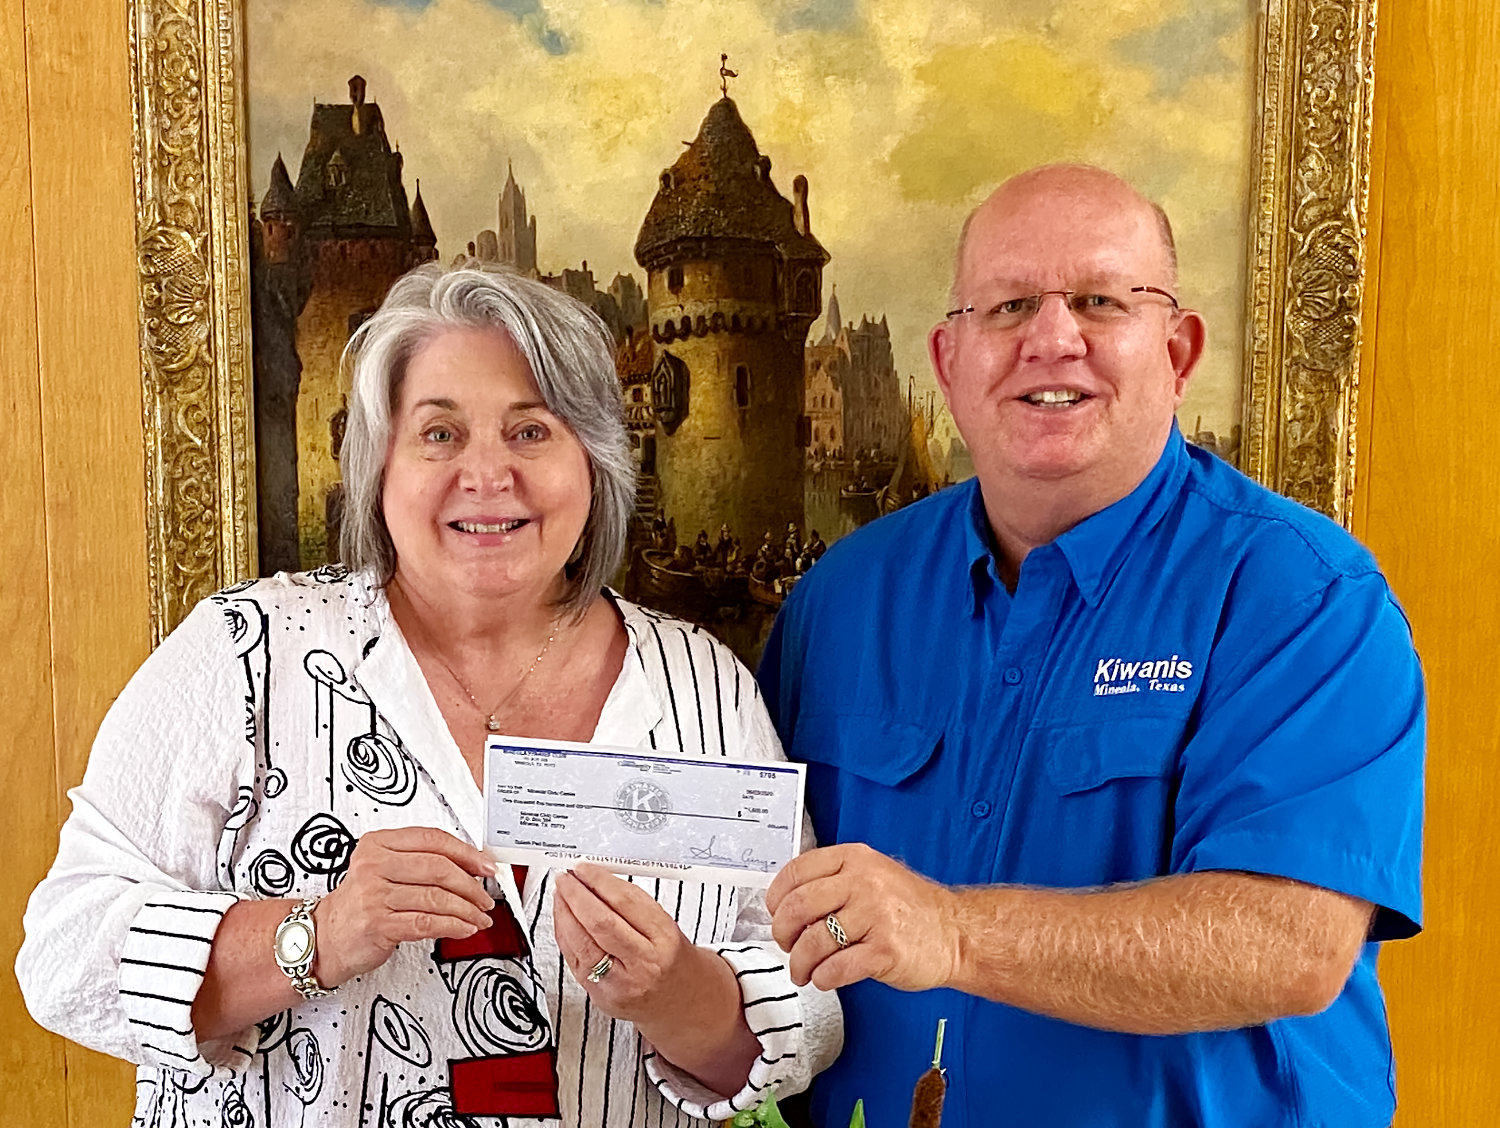 Nancy Murphy, civic center manager, accepts the $1,500 check from Kevin White, Mineola Kiwanis president.